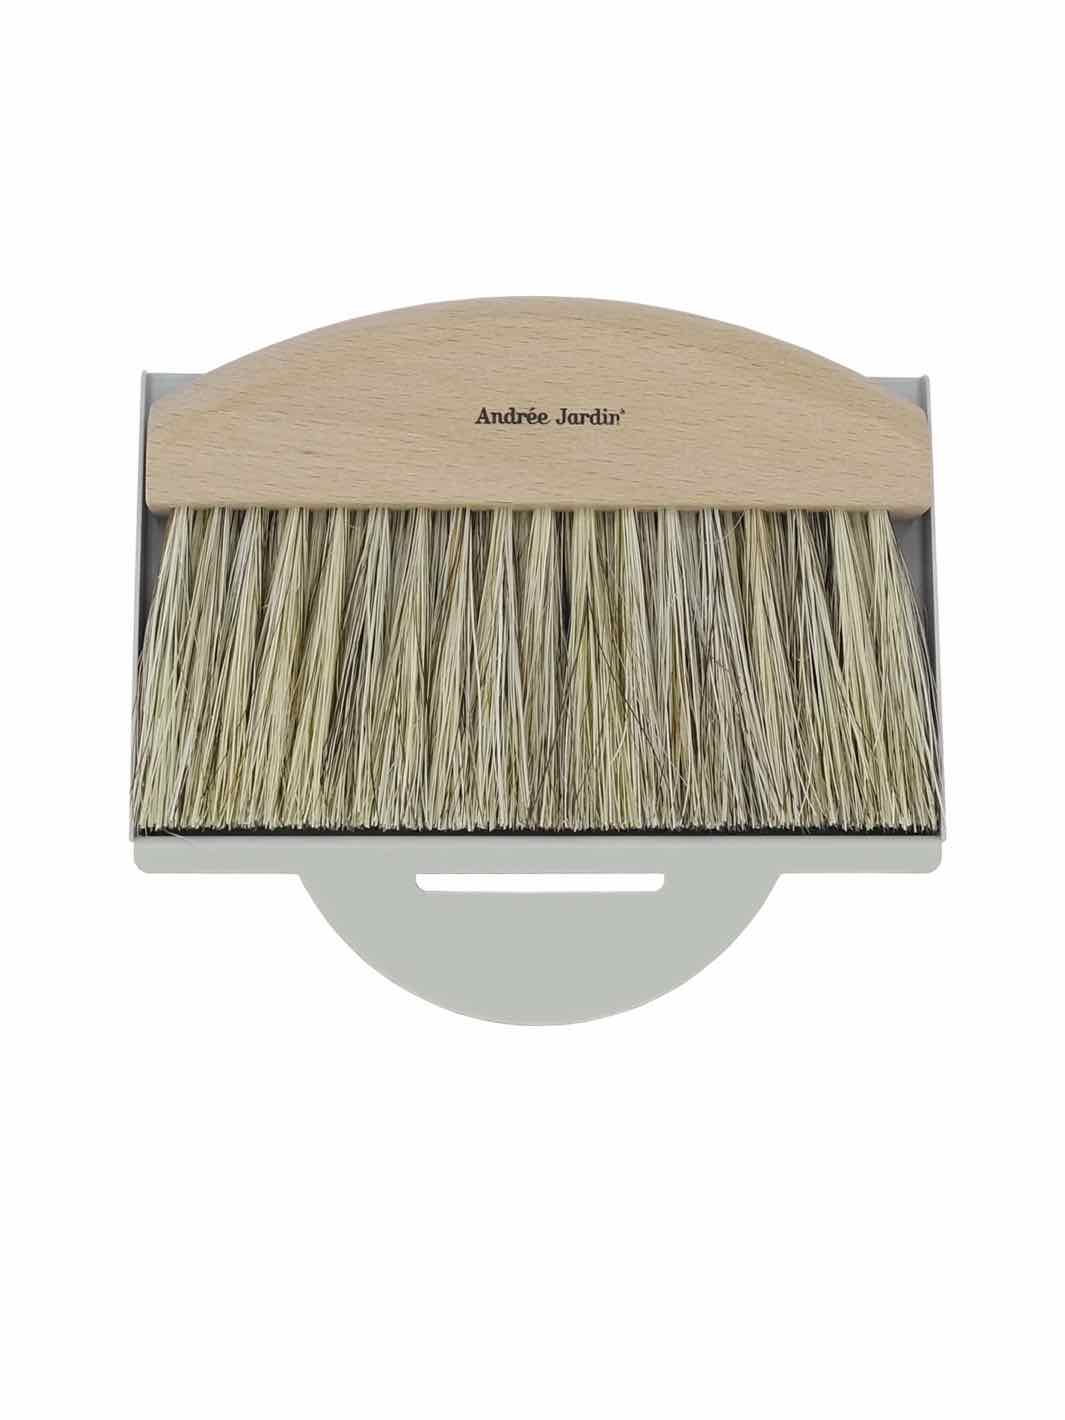 Andrée Jardin Tradition Saucepan Brushes (Set of 2) – French Dry Goods